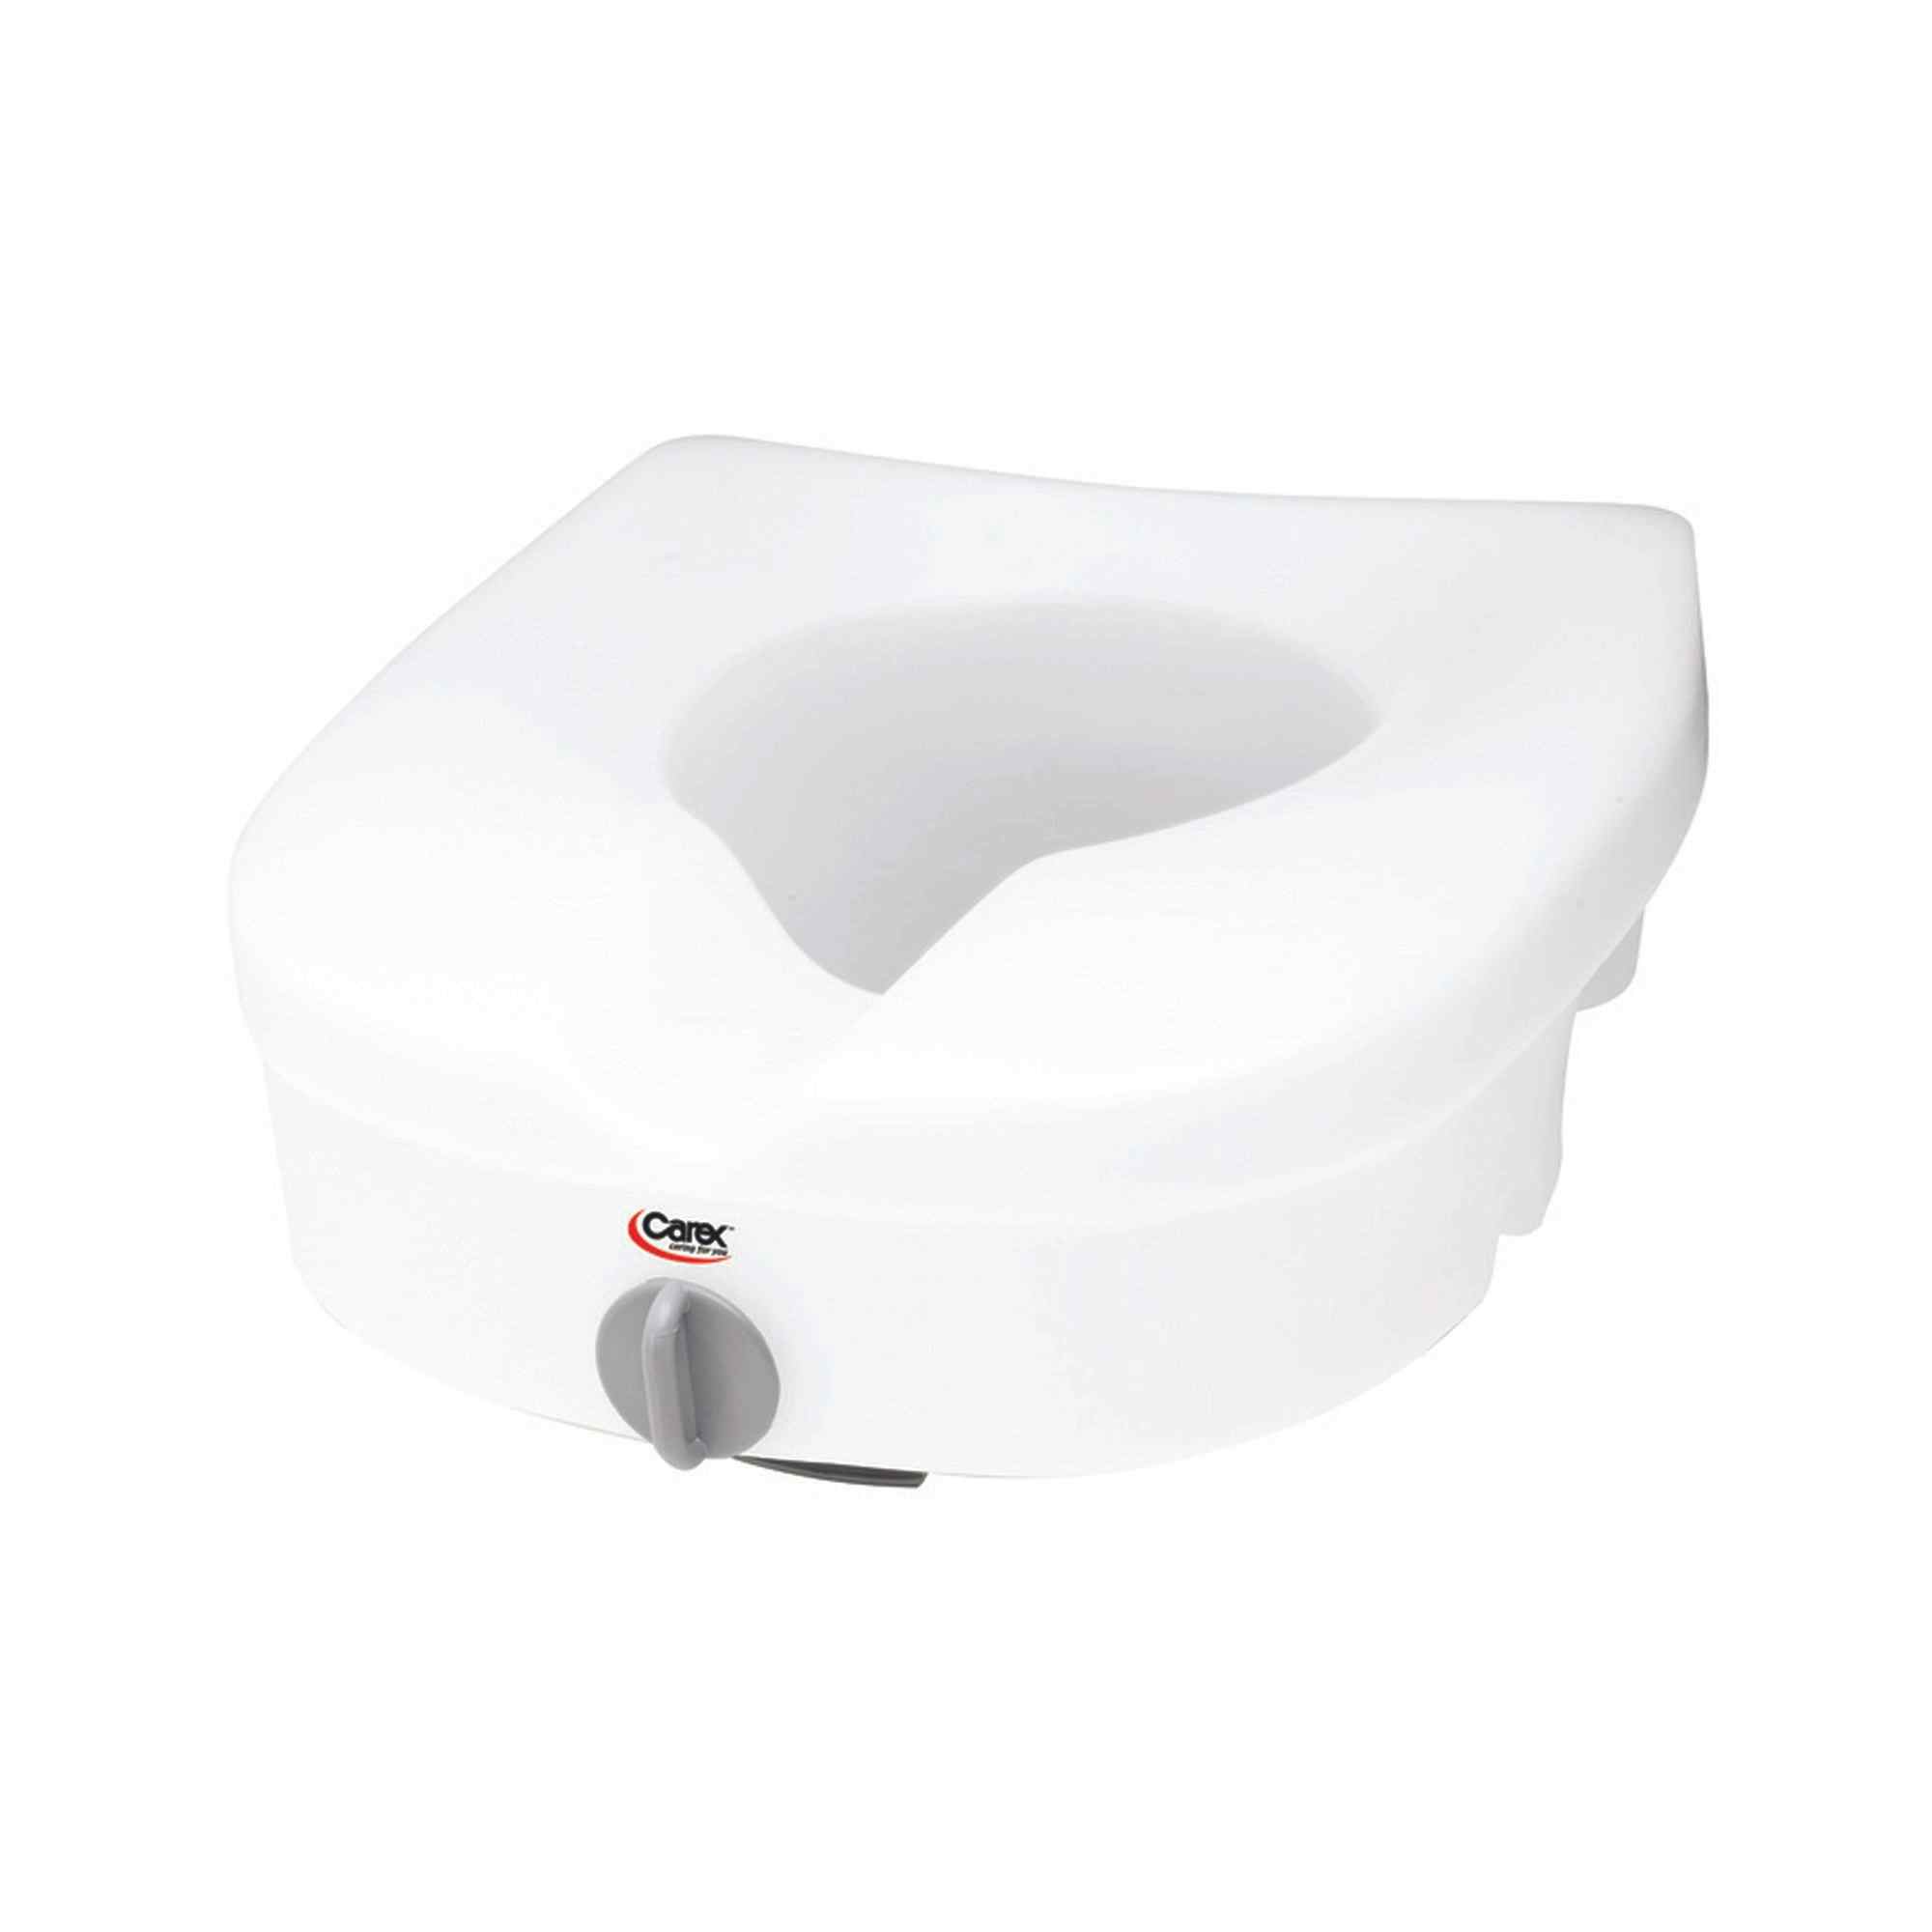 Carex Raised Toilet Seat with E-Z Lock, FGB305000000, Case of 2